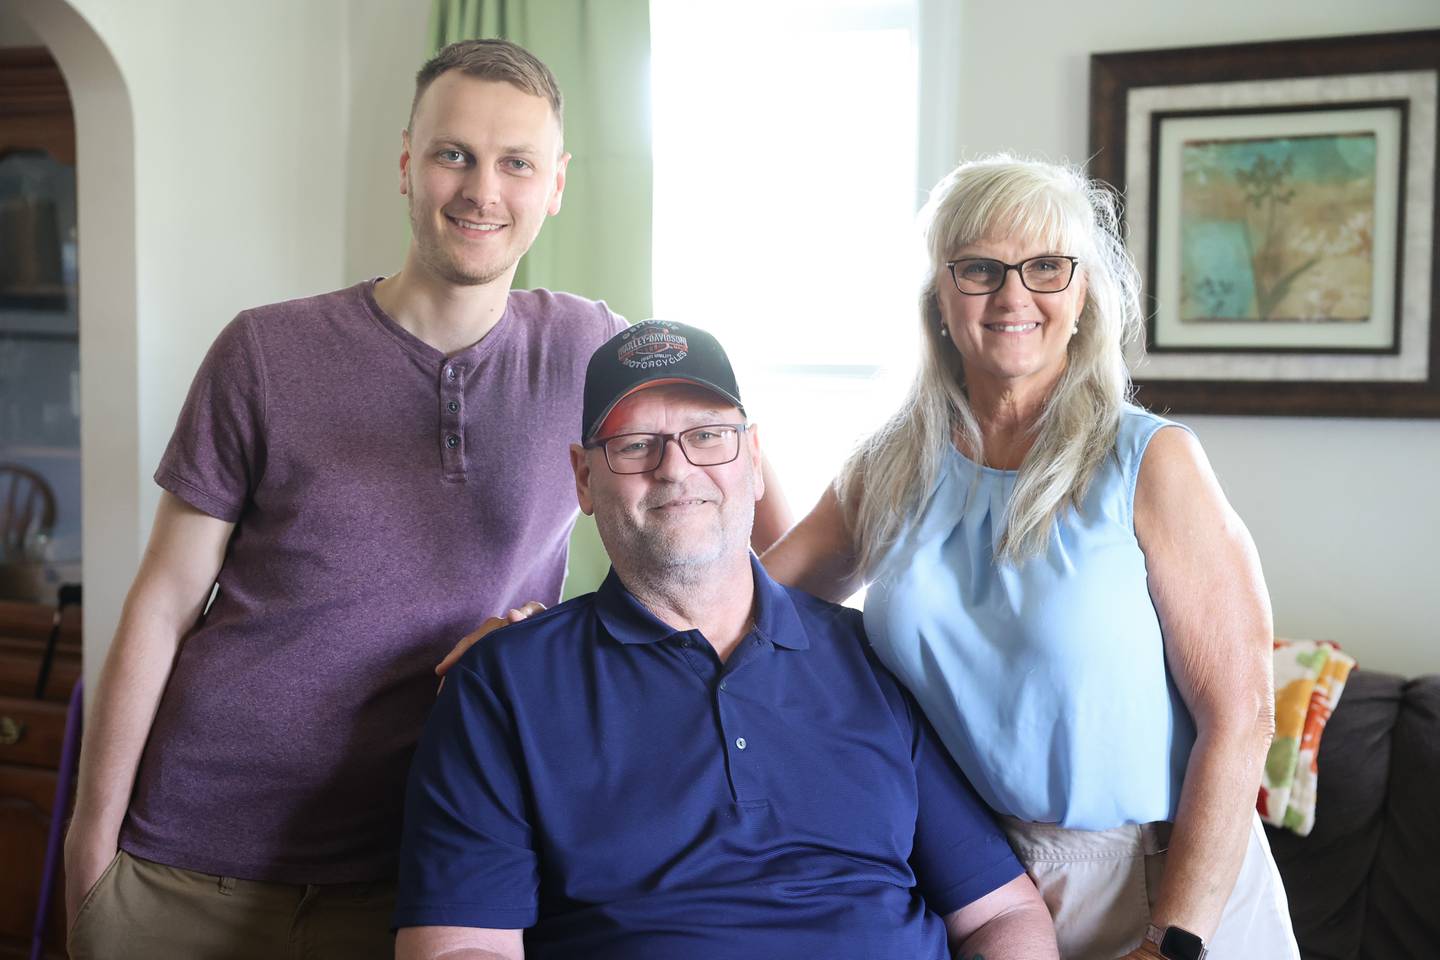 Sean Flannery, left, stands with his father and mother, Tim and Joann. Nearly a year after Tim’s motorcycle accident that left him in critical condition, Tim is still recovering with the help of his son and wife. Wednesday, June 15, 2022 in Joliet.